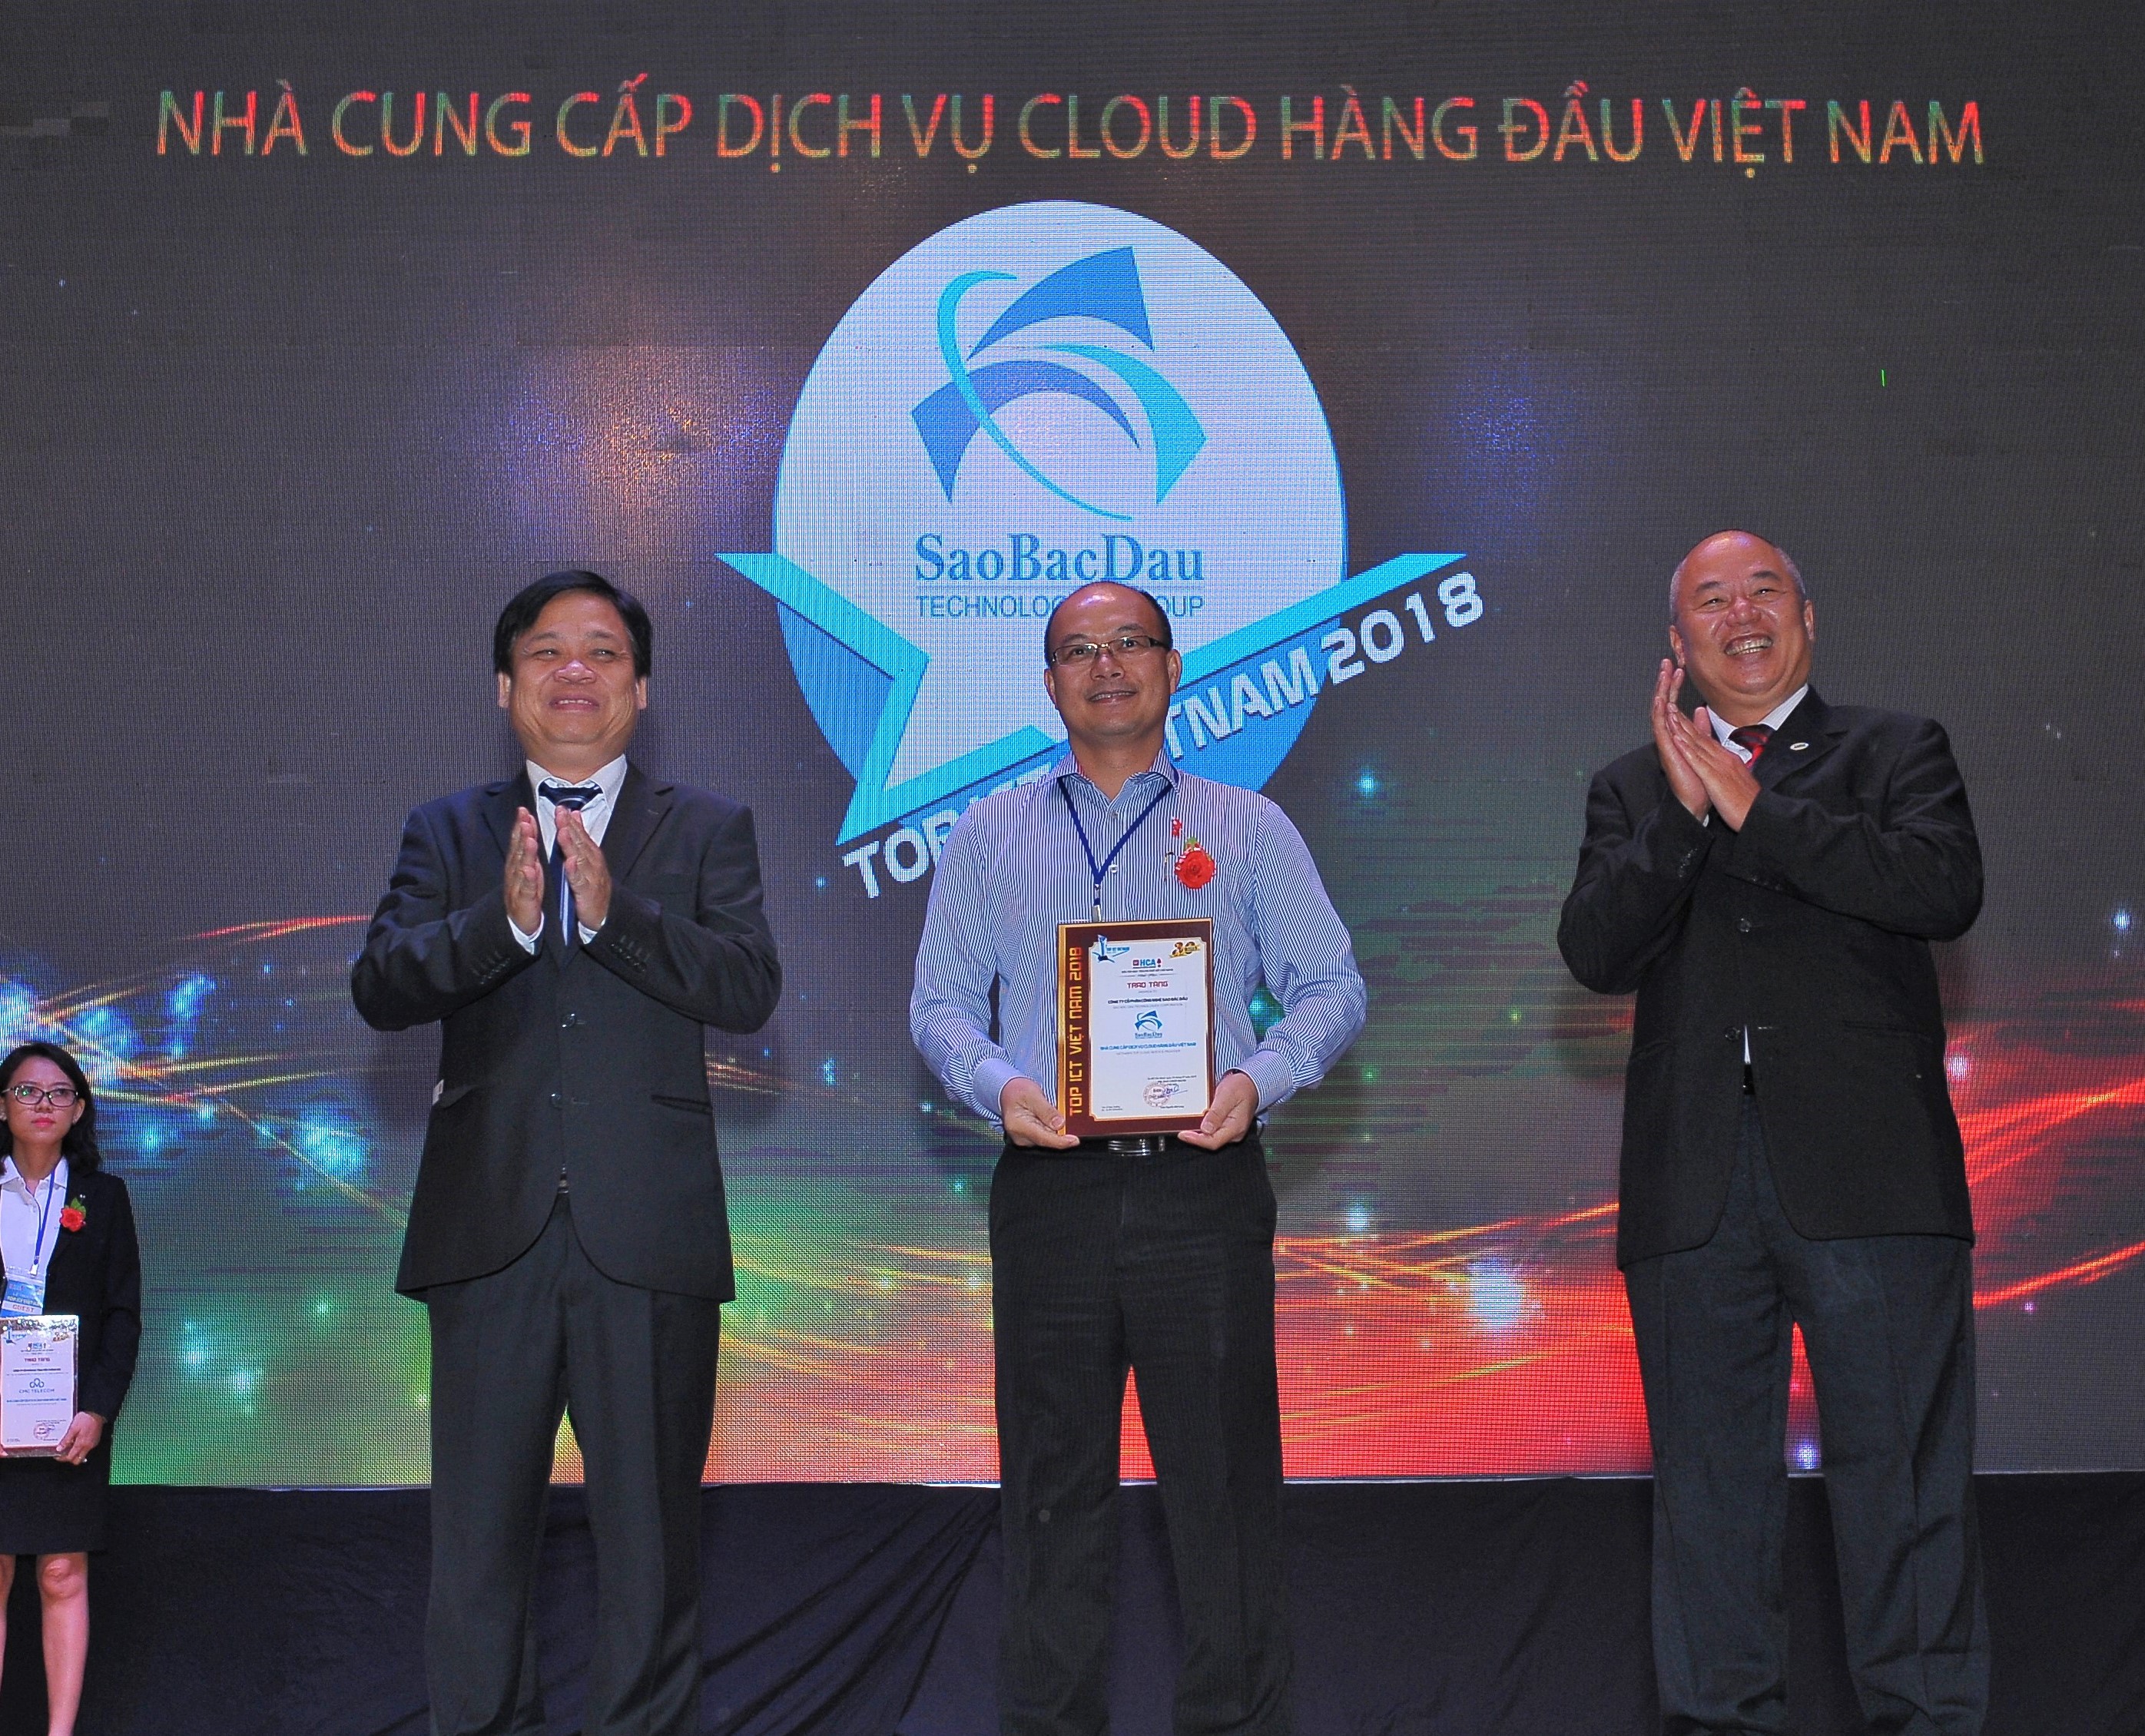 Sao Bac Dau Reaches Top ICT And Attends VIO In 2018